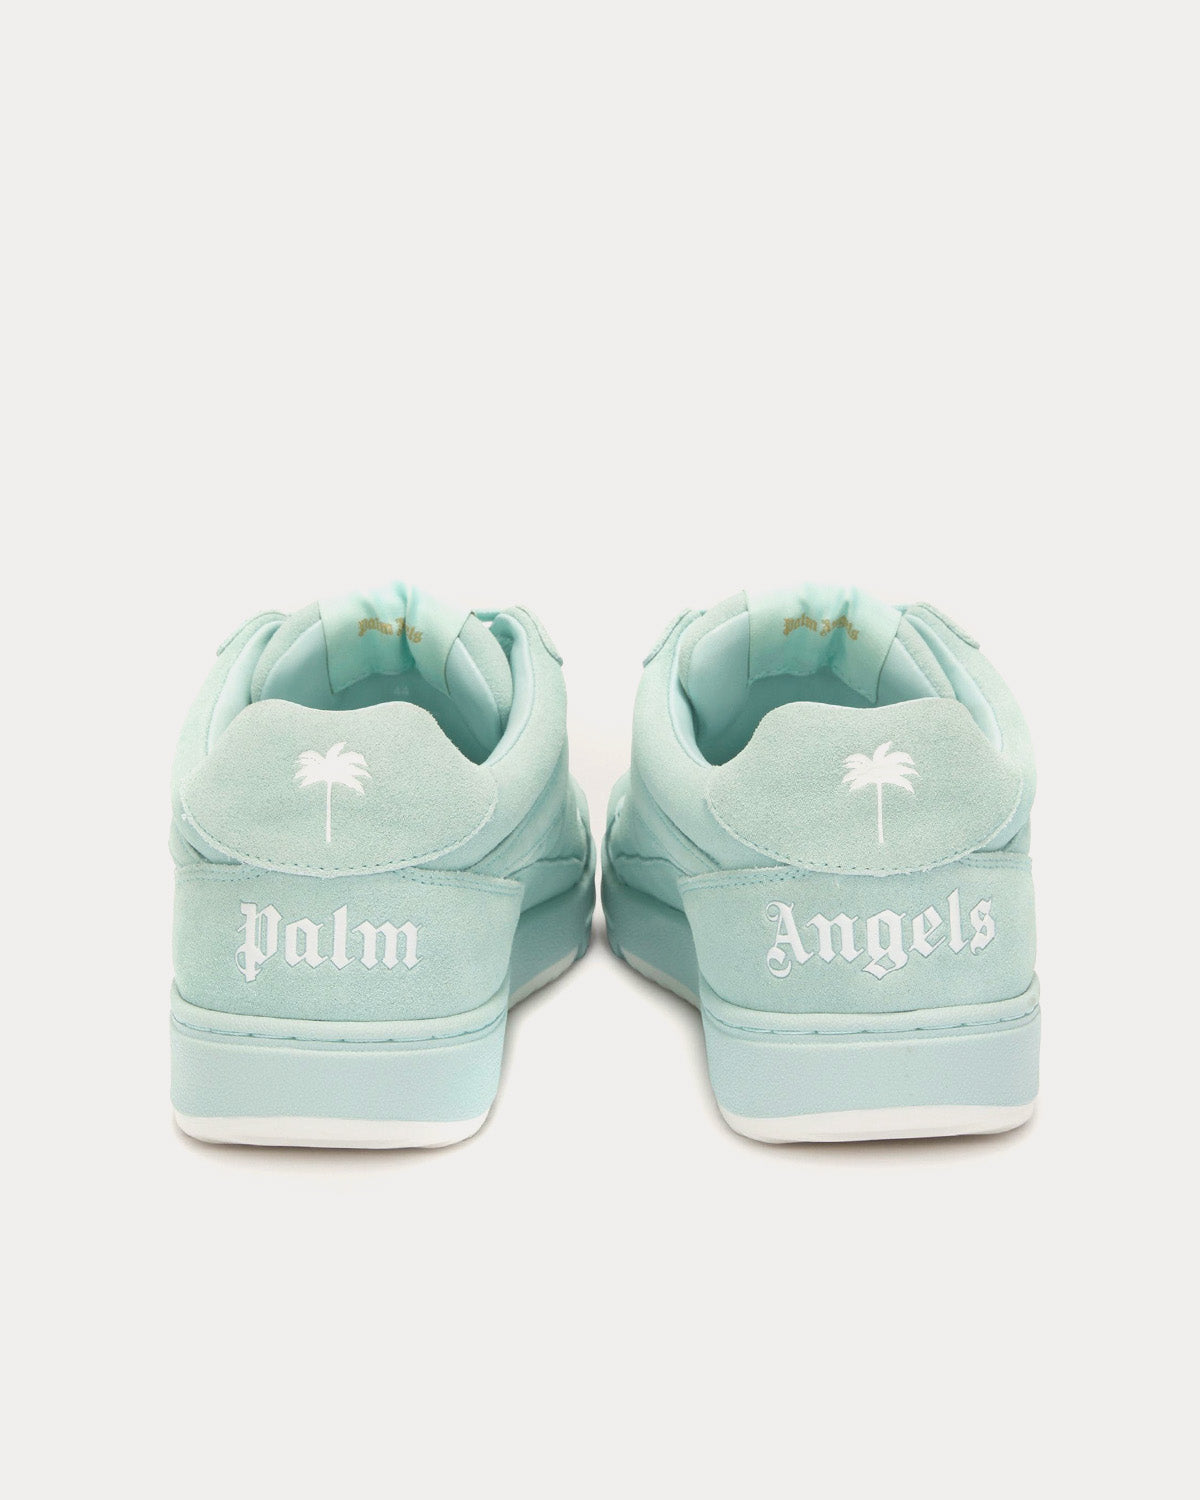 Palm Angels - University Turqouise / White Low Top Sneakers